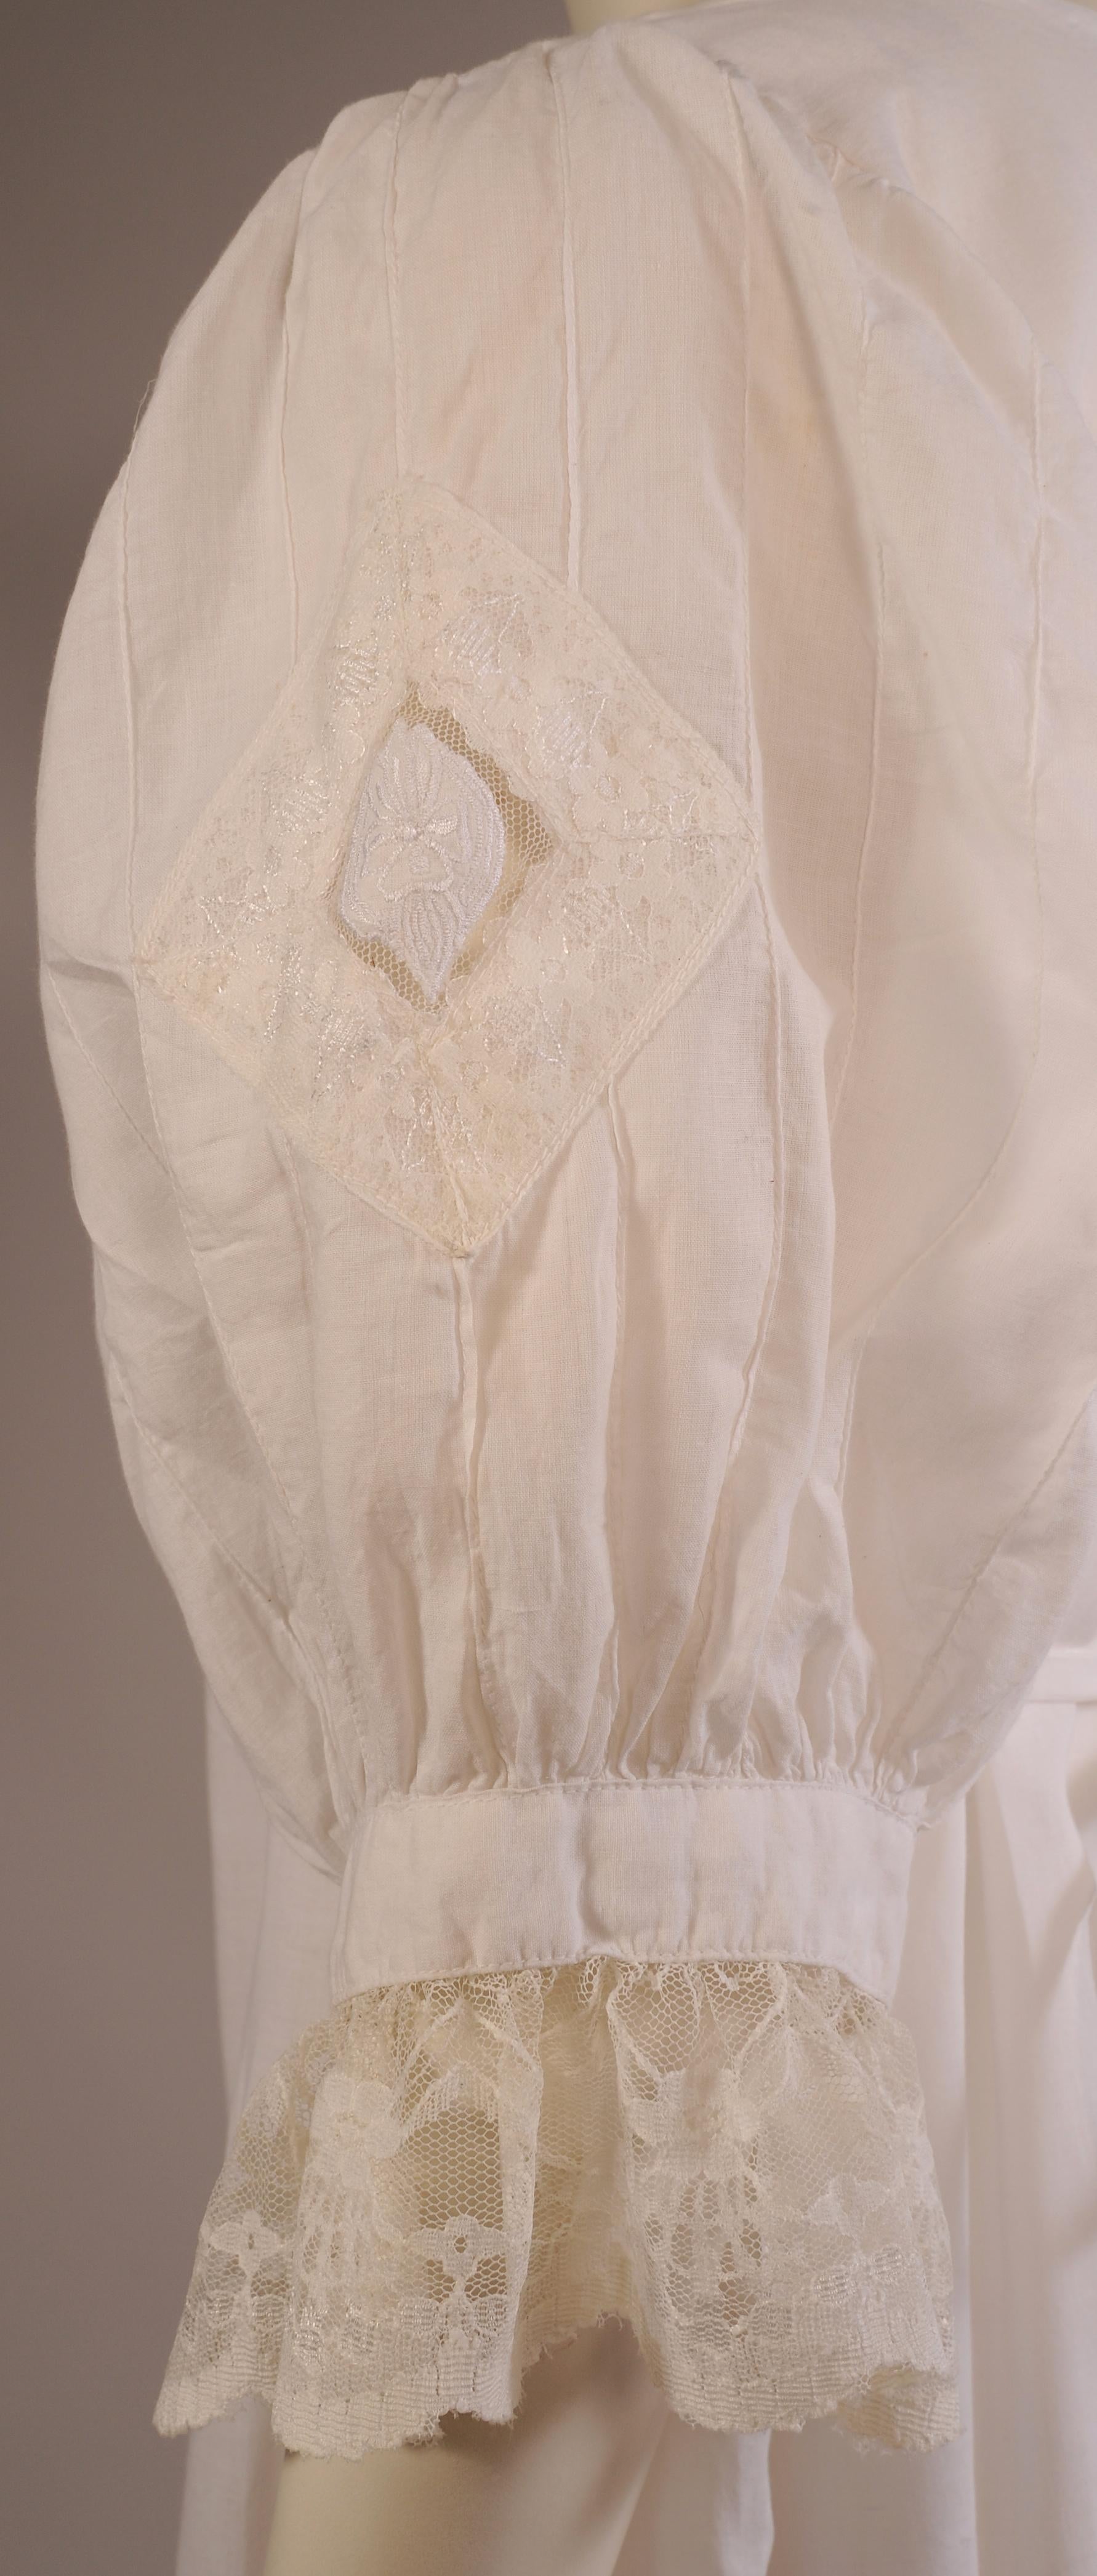 Victorian Inspired White Cotton and Lace Dress circa 1980 For Sale 2